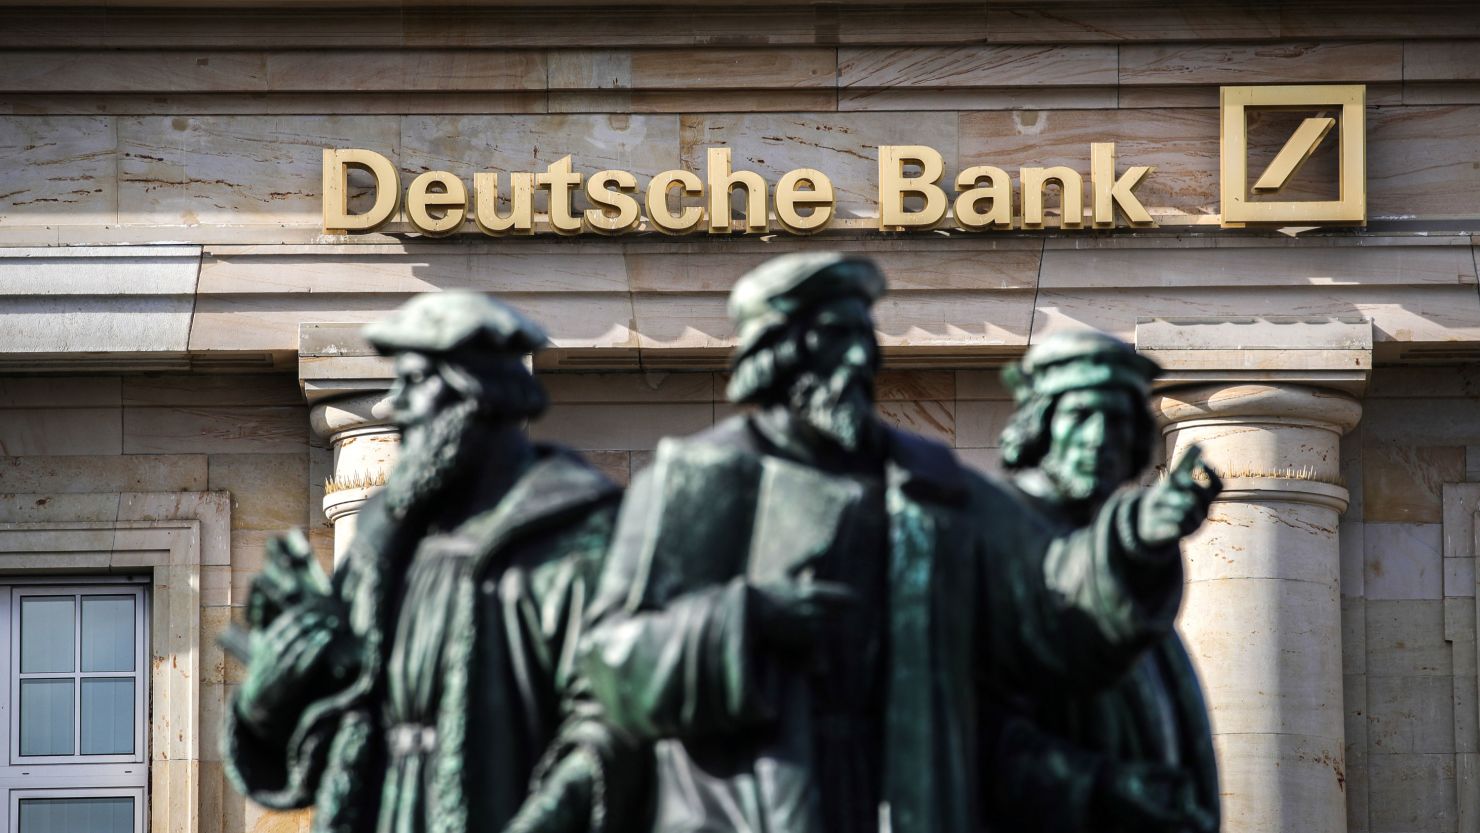 The logo of German giant Deutsche Bank is seen on one of their branches in Frankfurt am Main, western Germany, on February 4, 2021, as the bank publishes its preliminary results for the 2020 financial year. - Deutsche Bank posted on February 4 its first annual profit in six years, boosted by strong gains at its investment banking division, the one time problem child of the business. Net profit for 2020 reached 113 million euros, while for the fourth quarter of the year, net earnings came in at 51 million euros. (Photo by Armando BABANI / AFP) (Photo by ARMANDO BABANI/AFP via Getty Images)